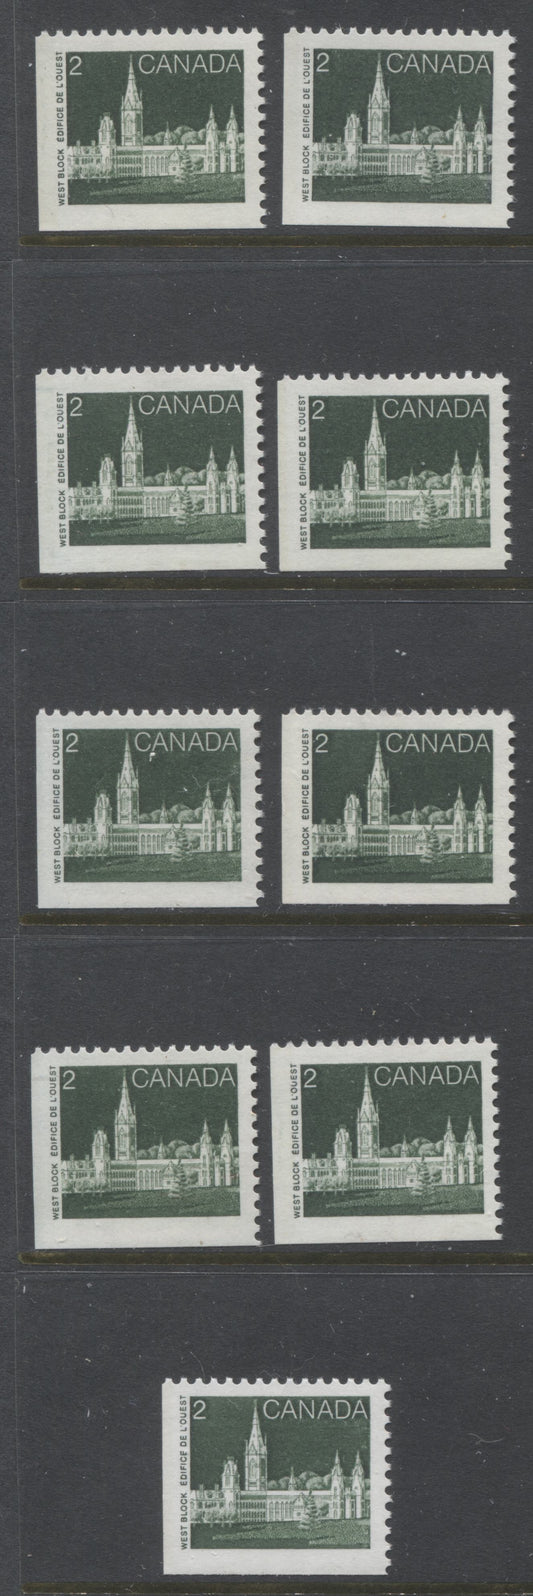 Lot 375 Canada #939, 939i, 939ii 2c  Deep Green Parliament Buildings, 1982-1987 Artifacts & National Parks Issue, 9 VFNH Booklet Singles,DF to HF, Abitibi & Rolland Papers All With Tag Bar At Left